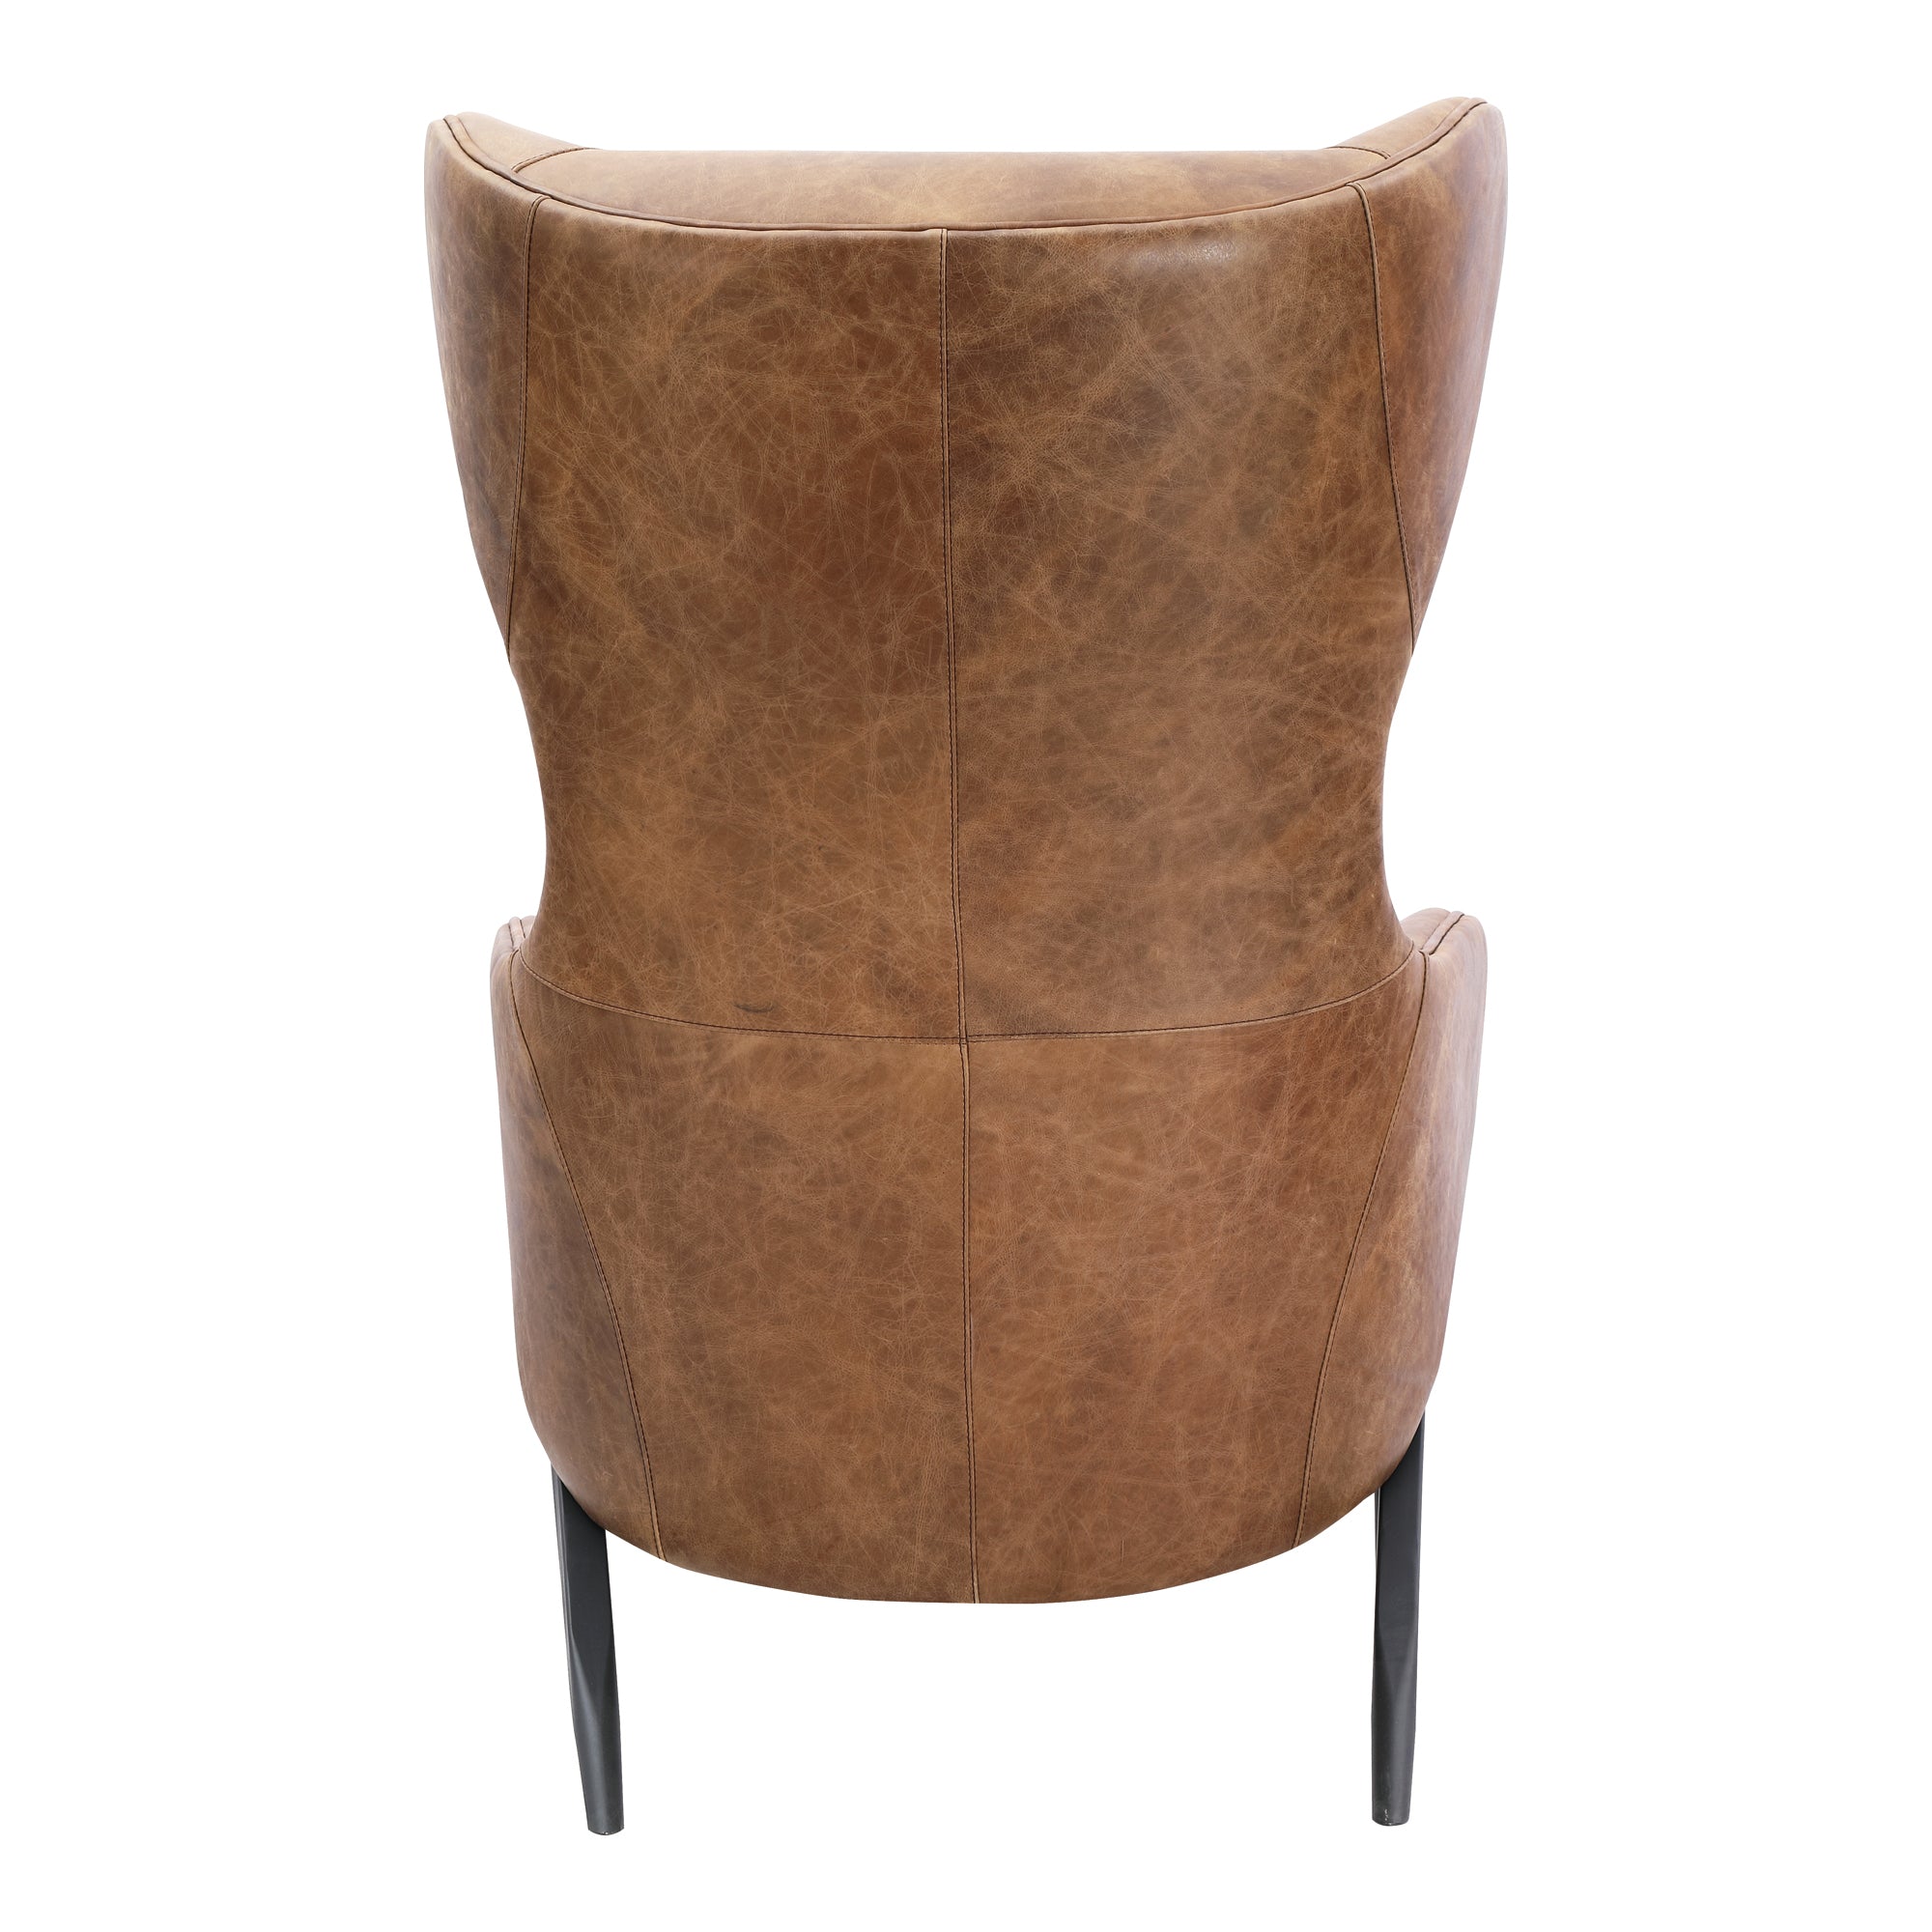 Amos Leather Accent Chair - Furniture - Tipplergoods